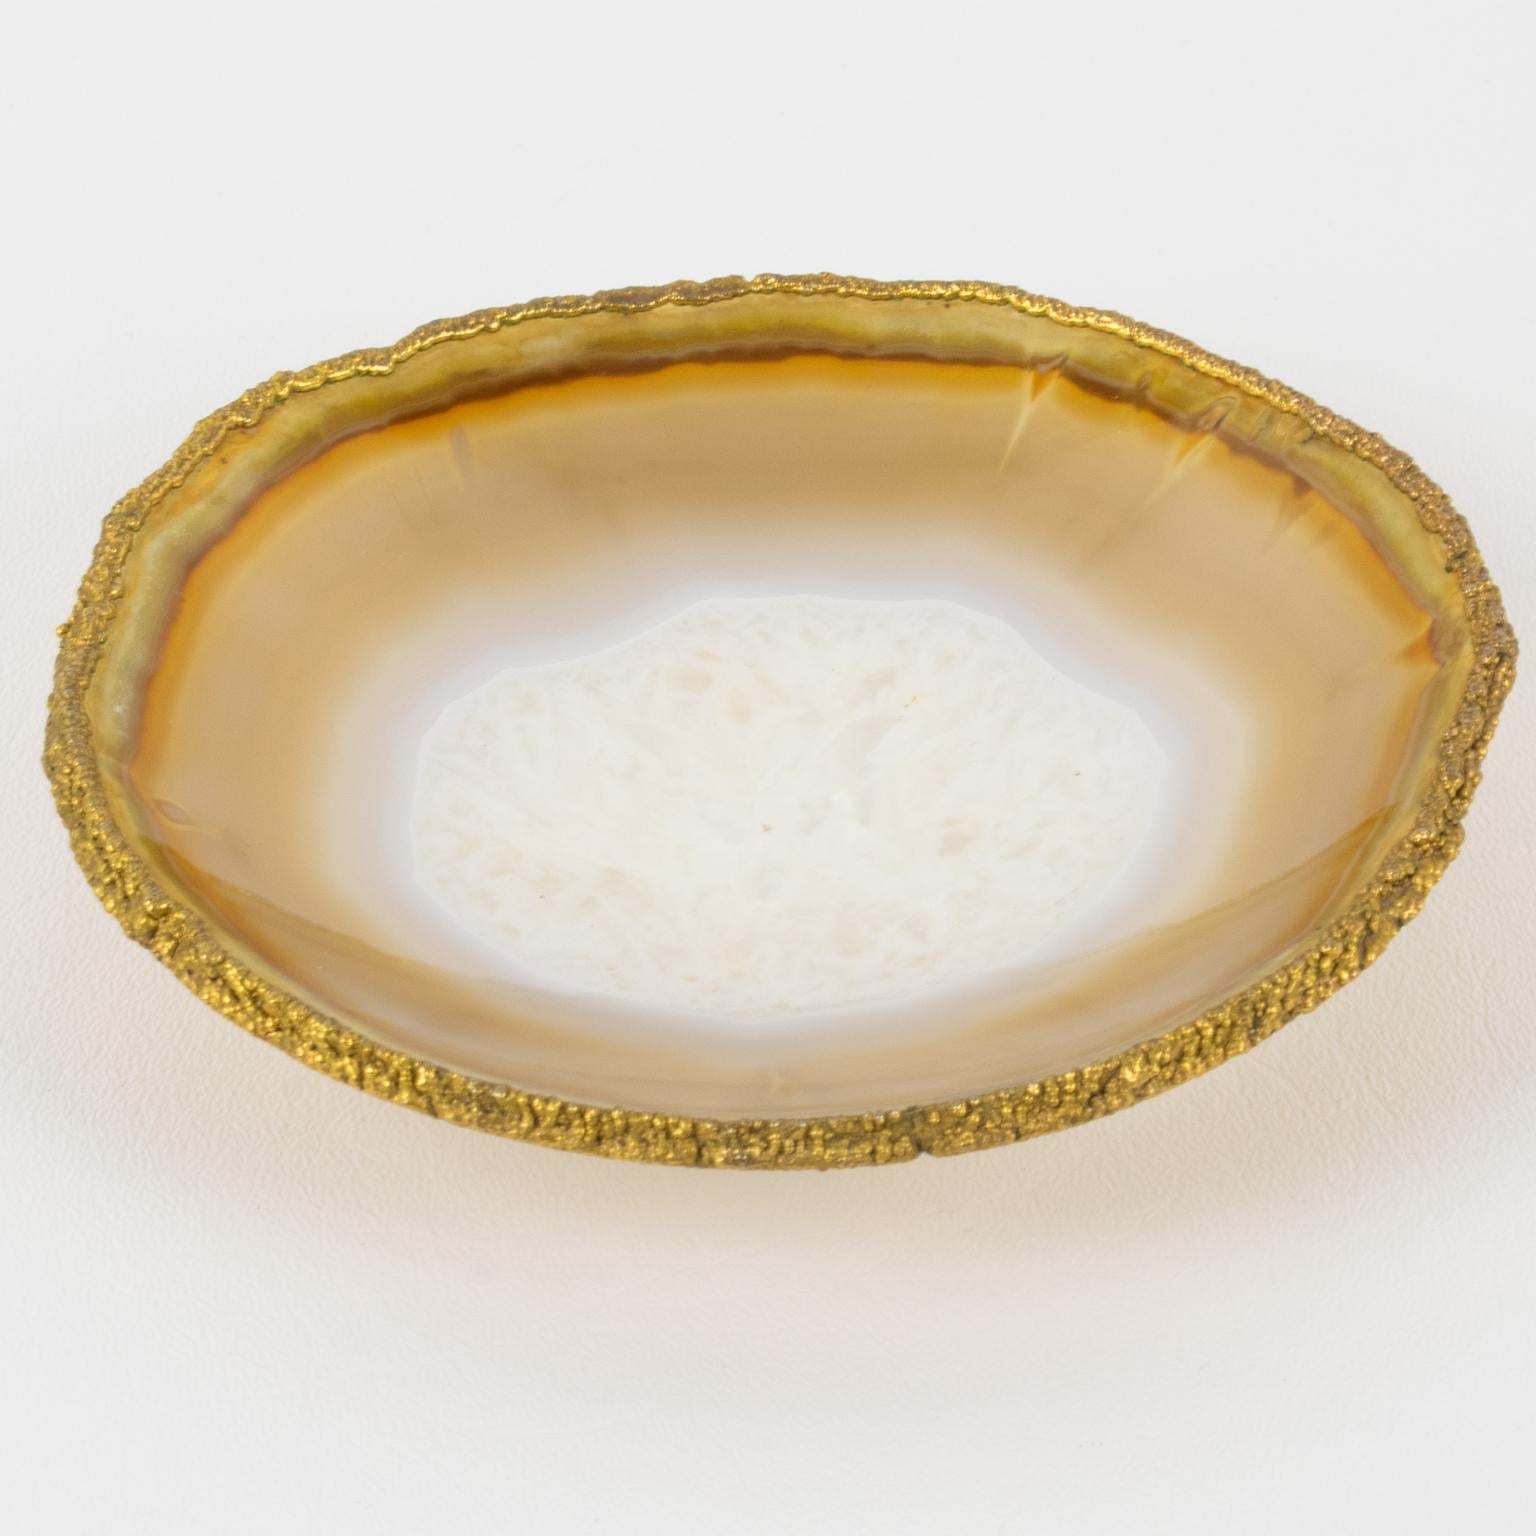 This elegant modernist natural agate stone desk tidy, or vide poche, is reminiscent of Willy Daro's work. The catchall features a natural agate stone rounded raised bowl with a gilded bronze trim and color swirlings. There is no visible maker's